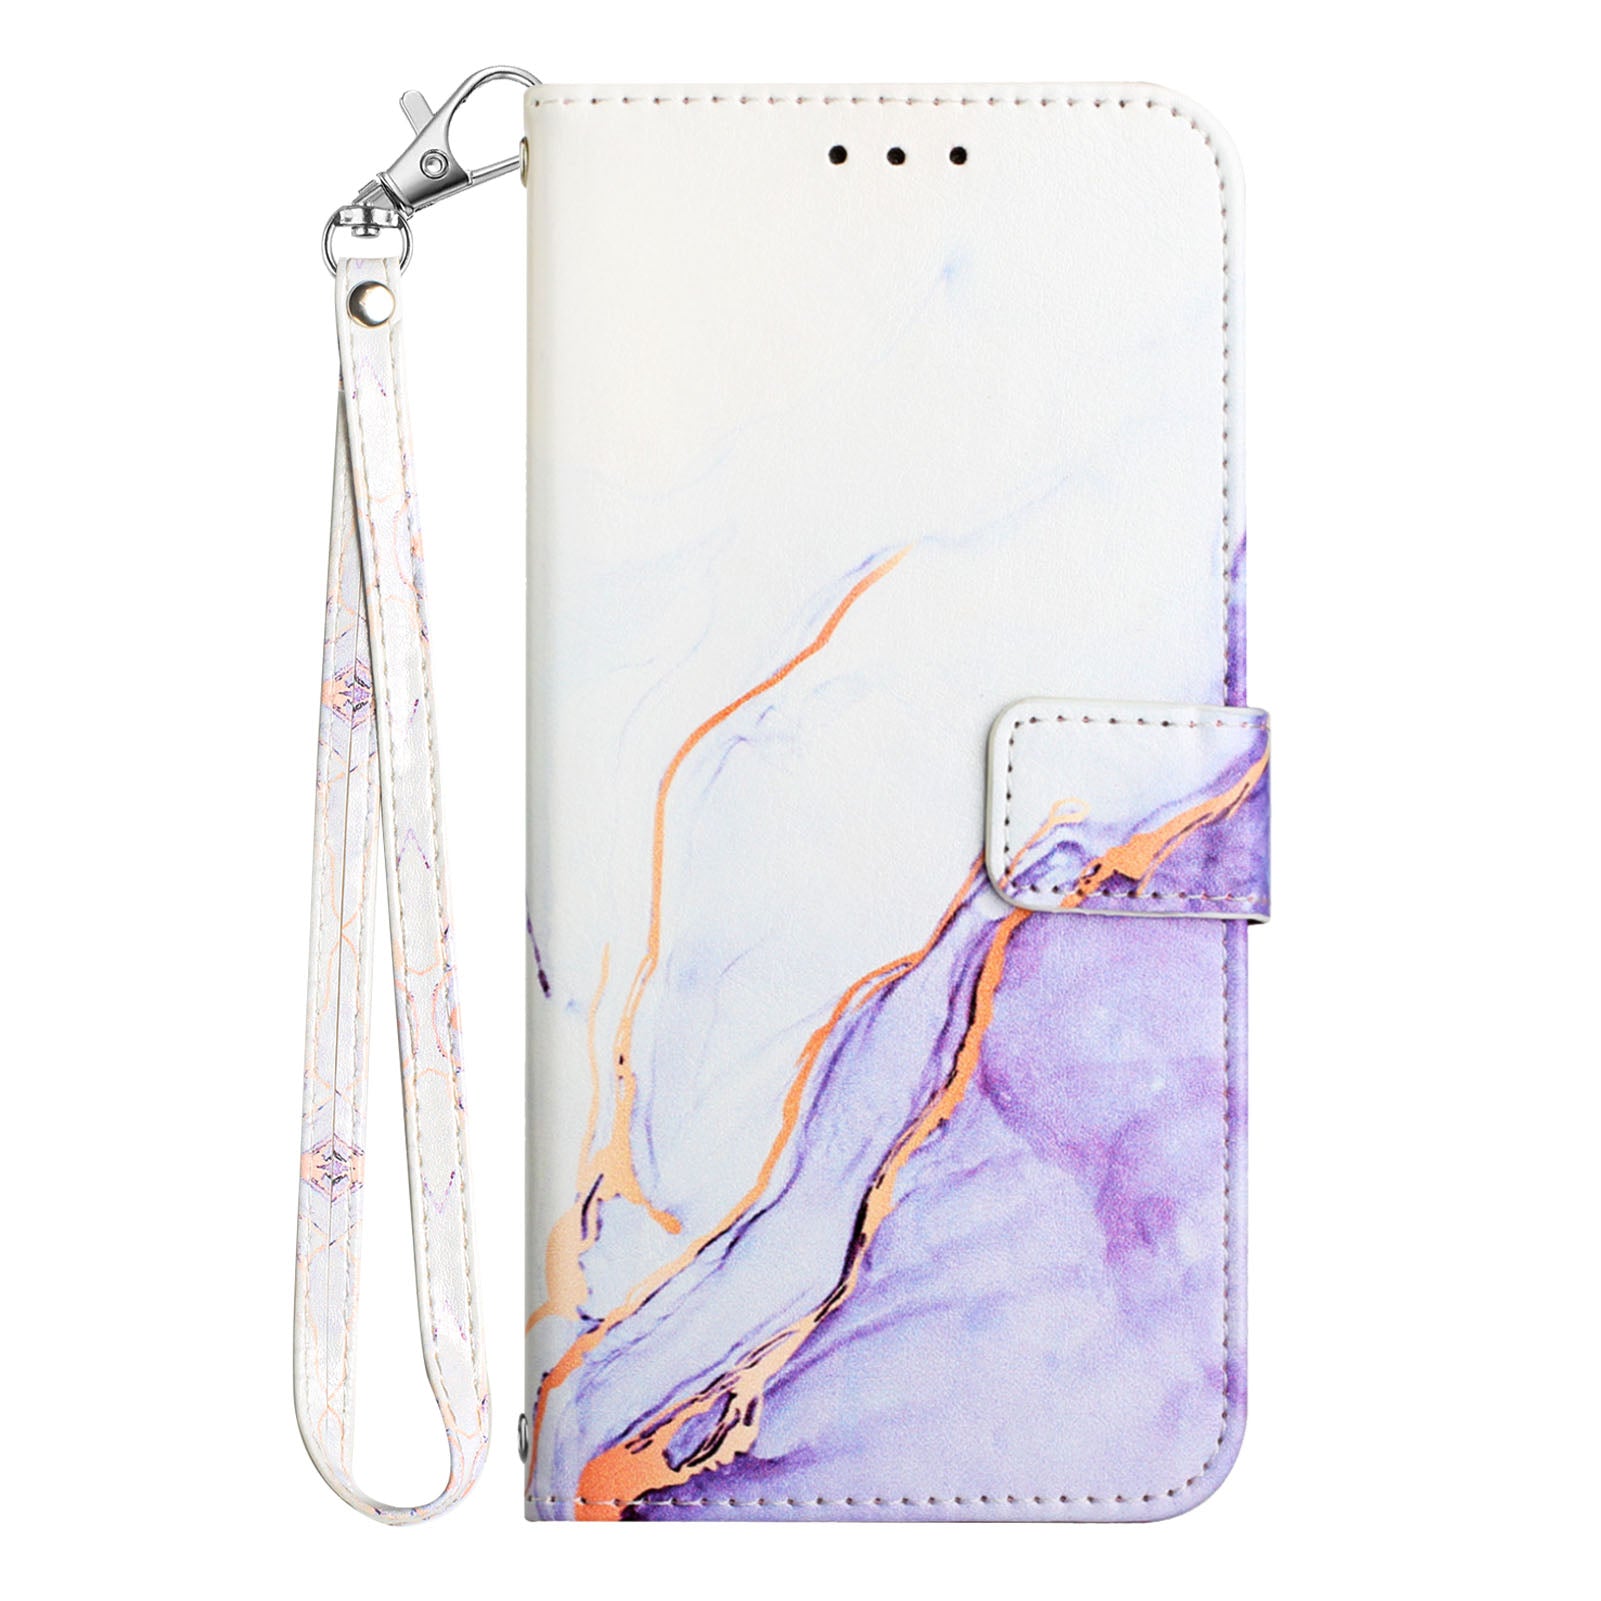 YB Pattern Printing Leather Series-5 For OnePlus 11 5G Marble Pattern Protective Cover Phone Case Wallet - White / Purple 006